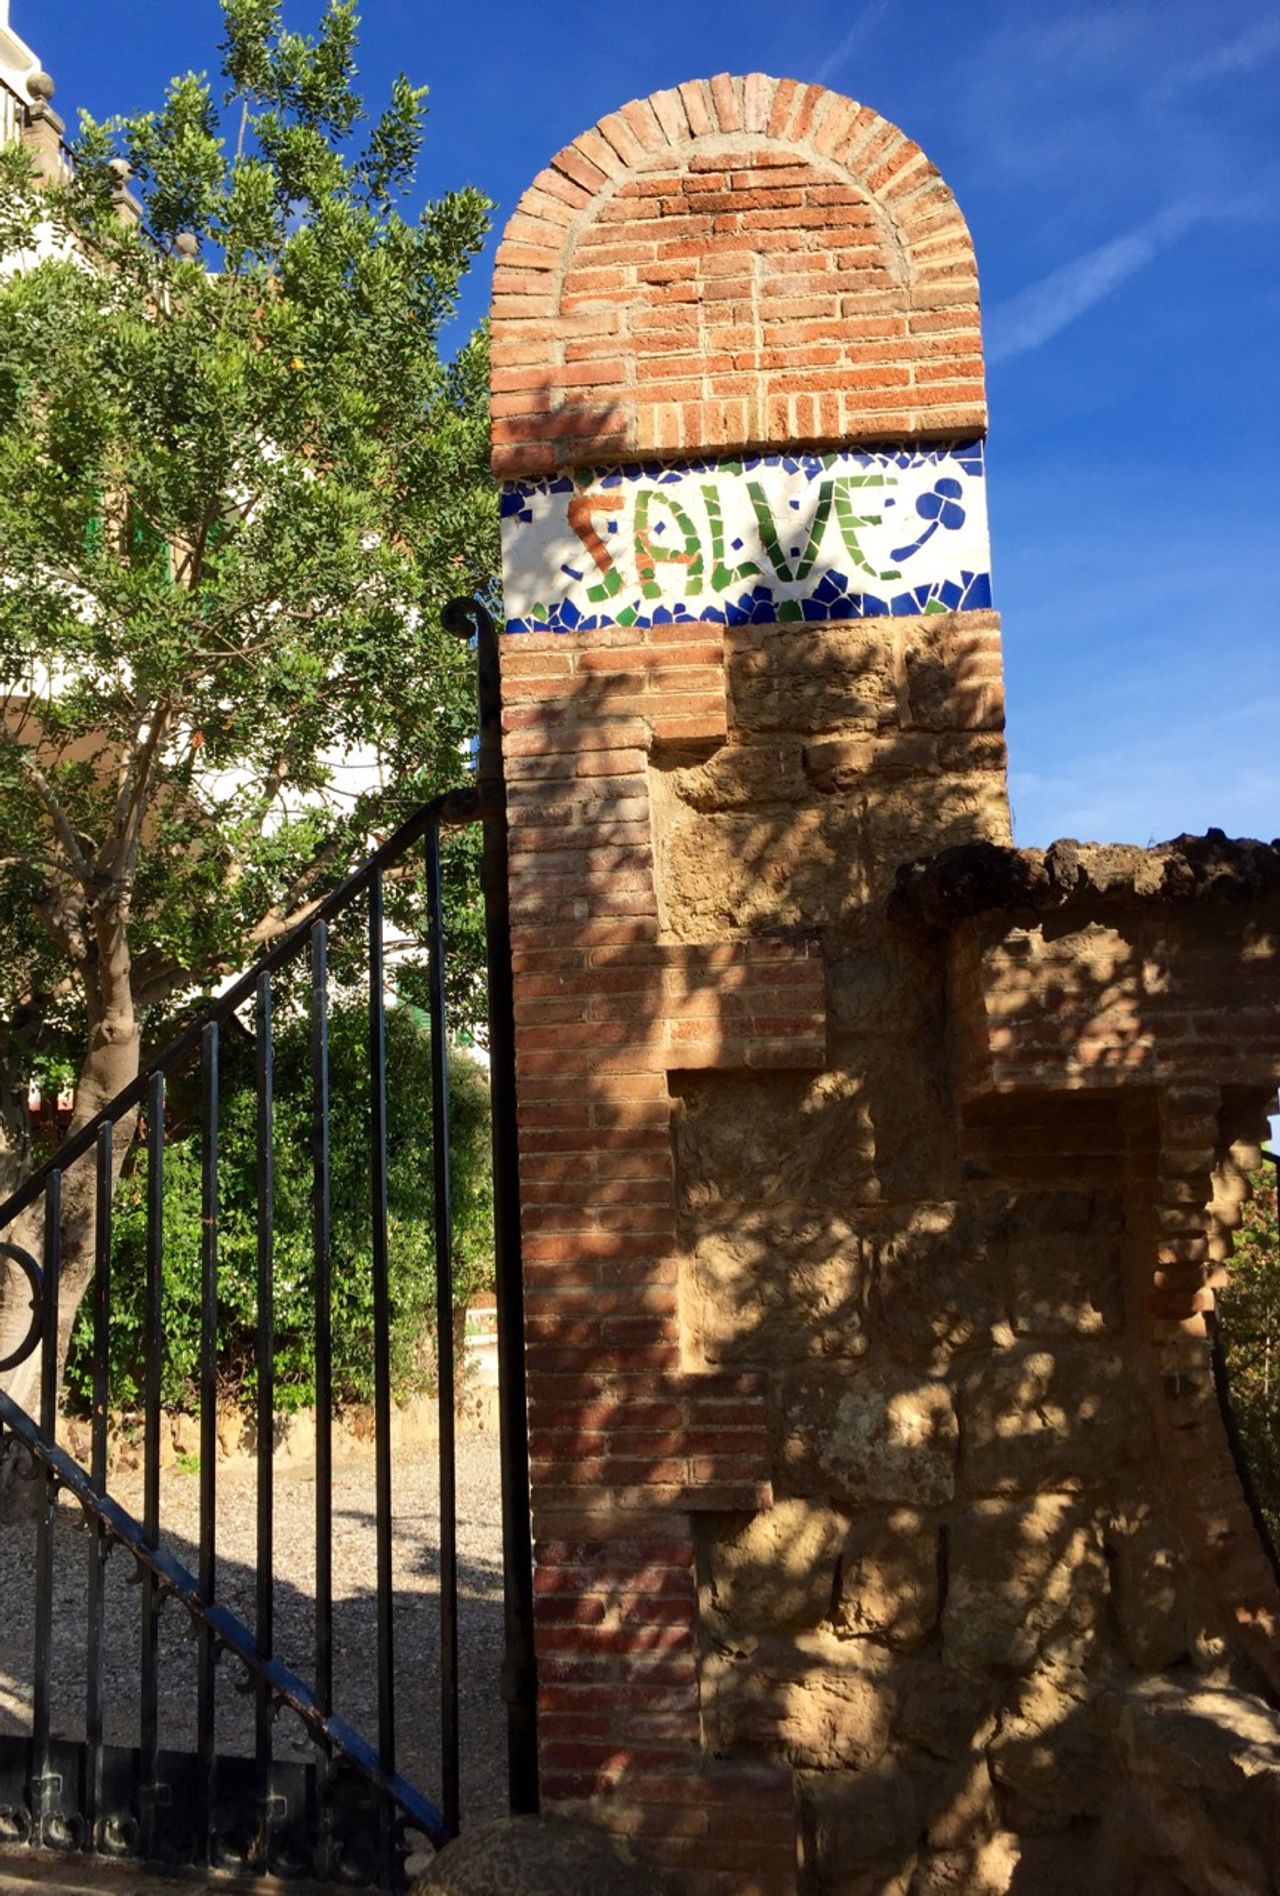 A mosaic sign with the word "Salve"